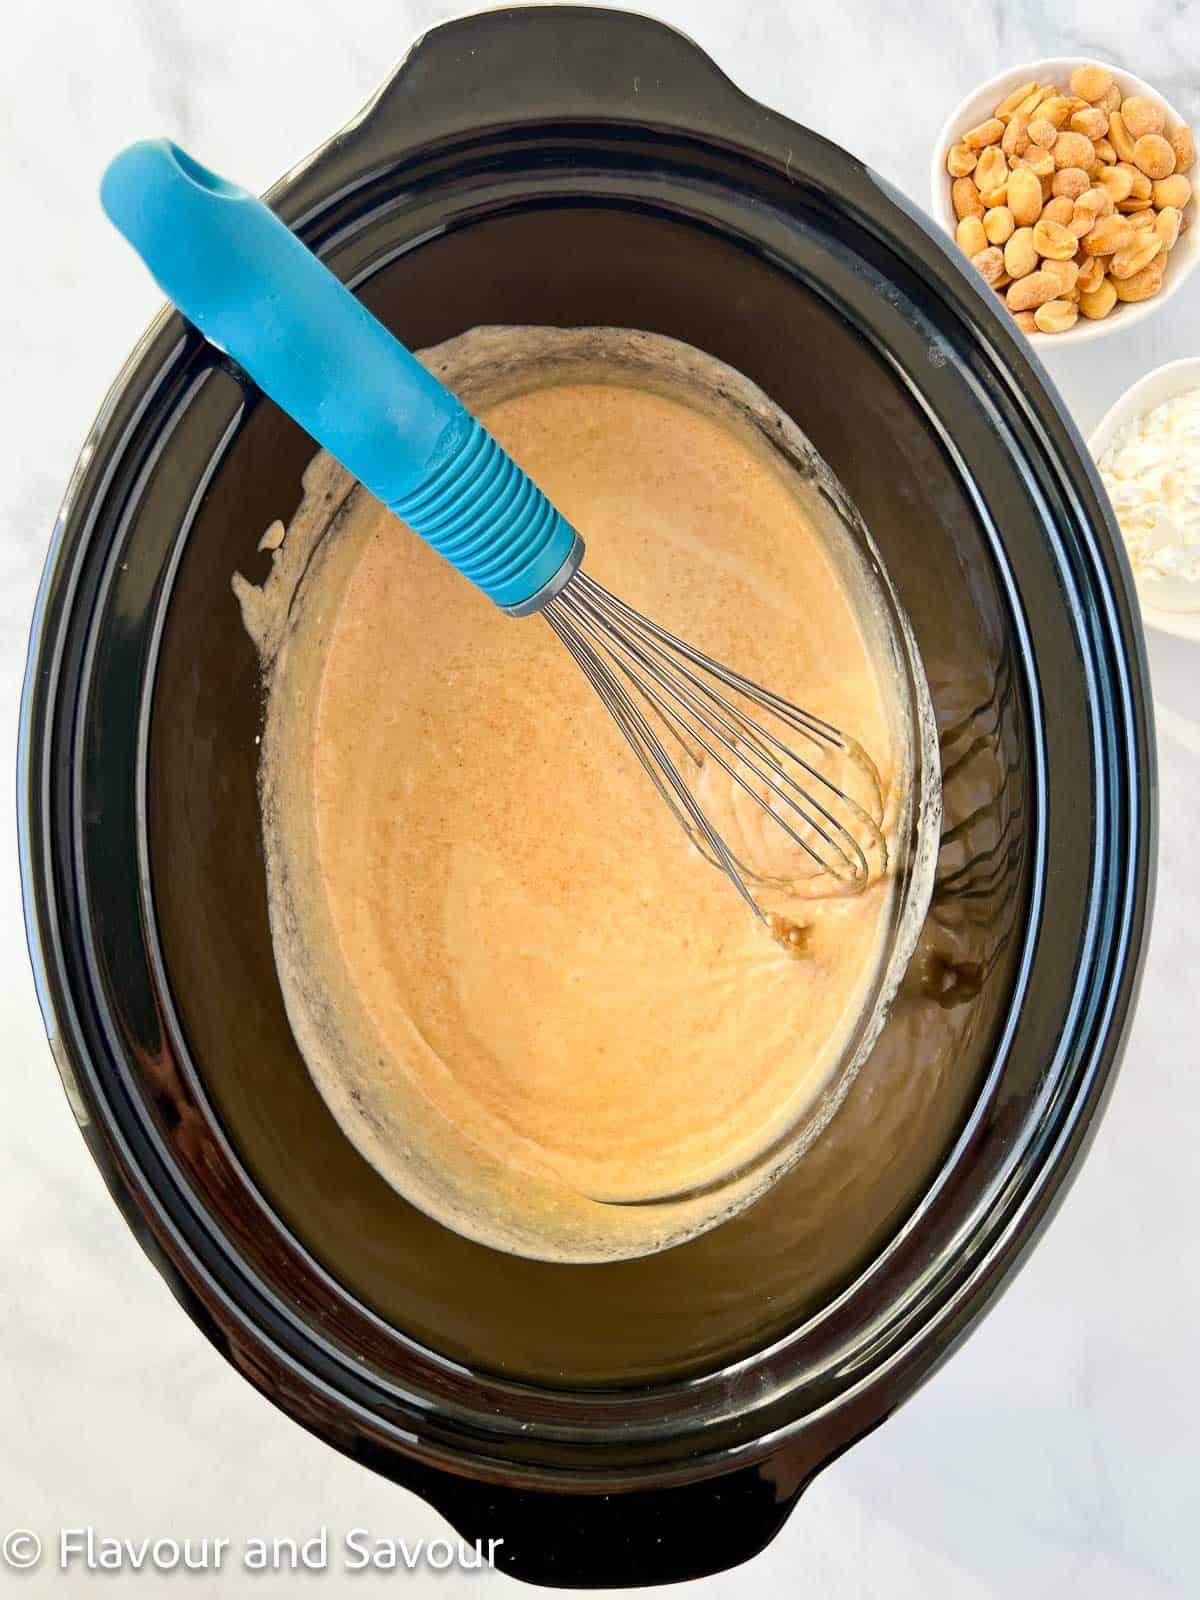 Whisking peanut sauce ingredients together in the bowl of a slow cooker.